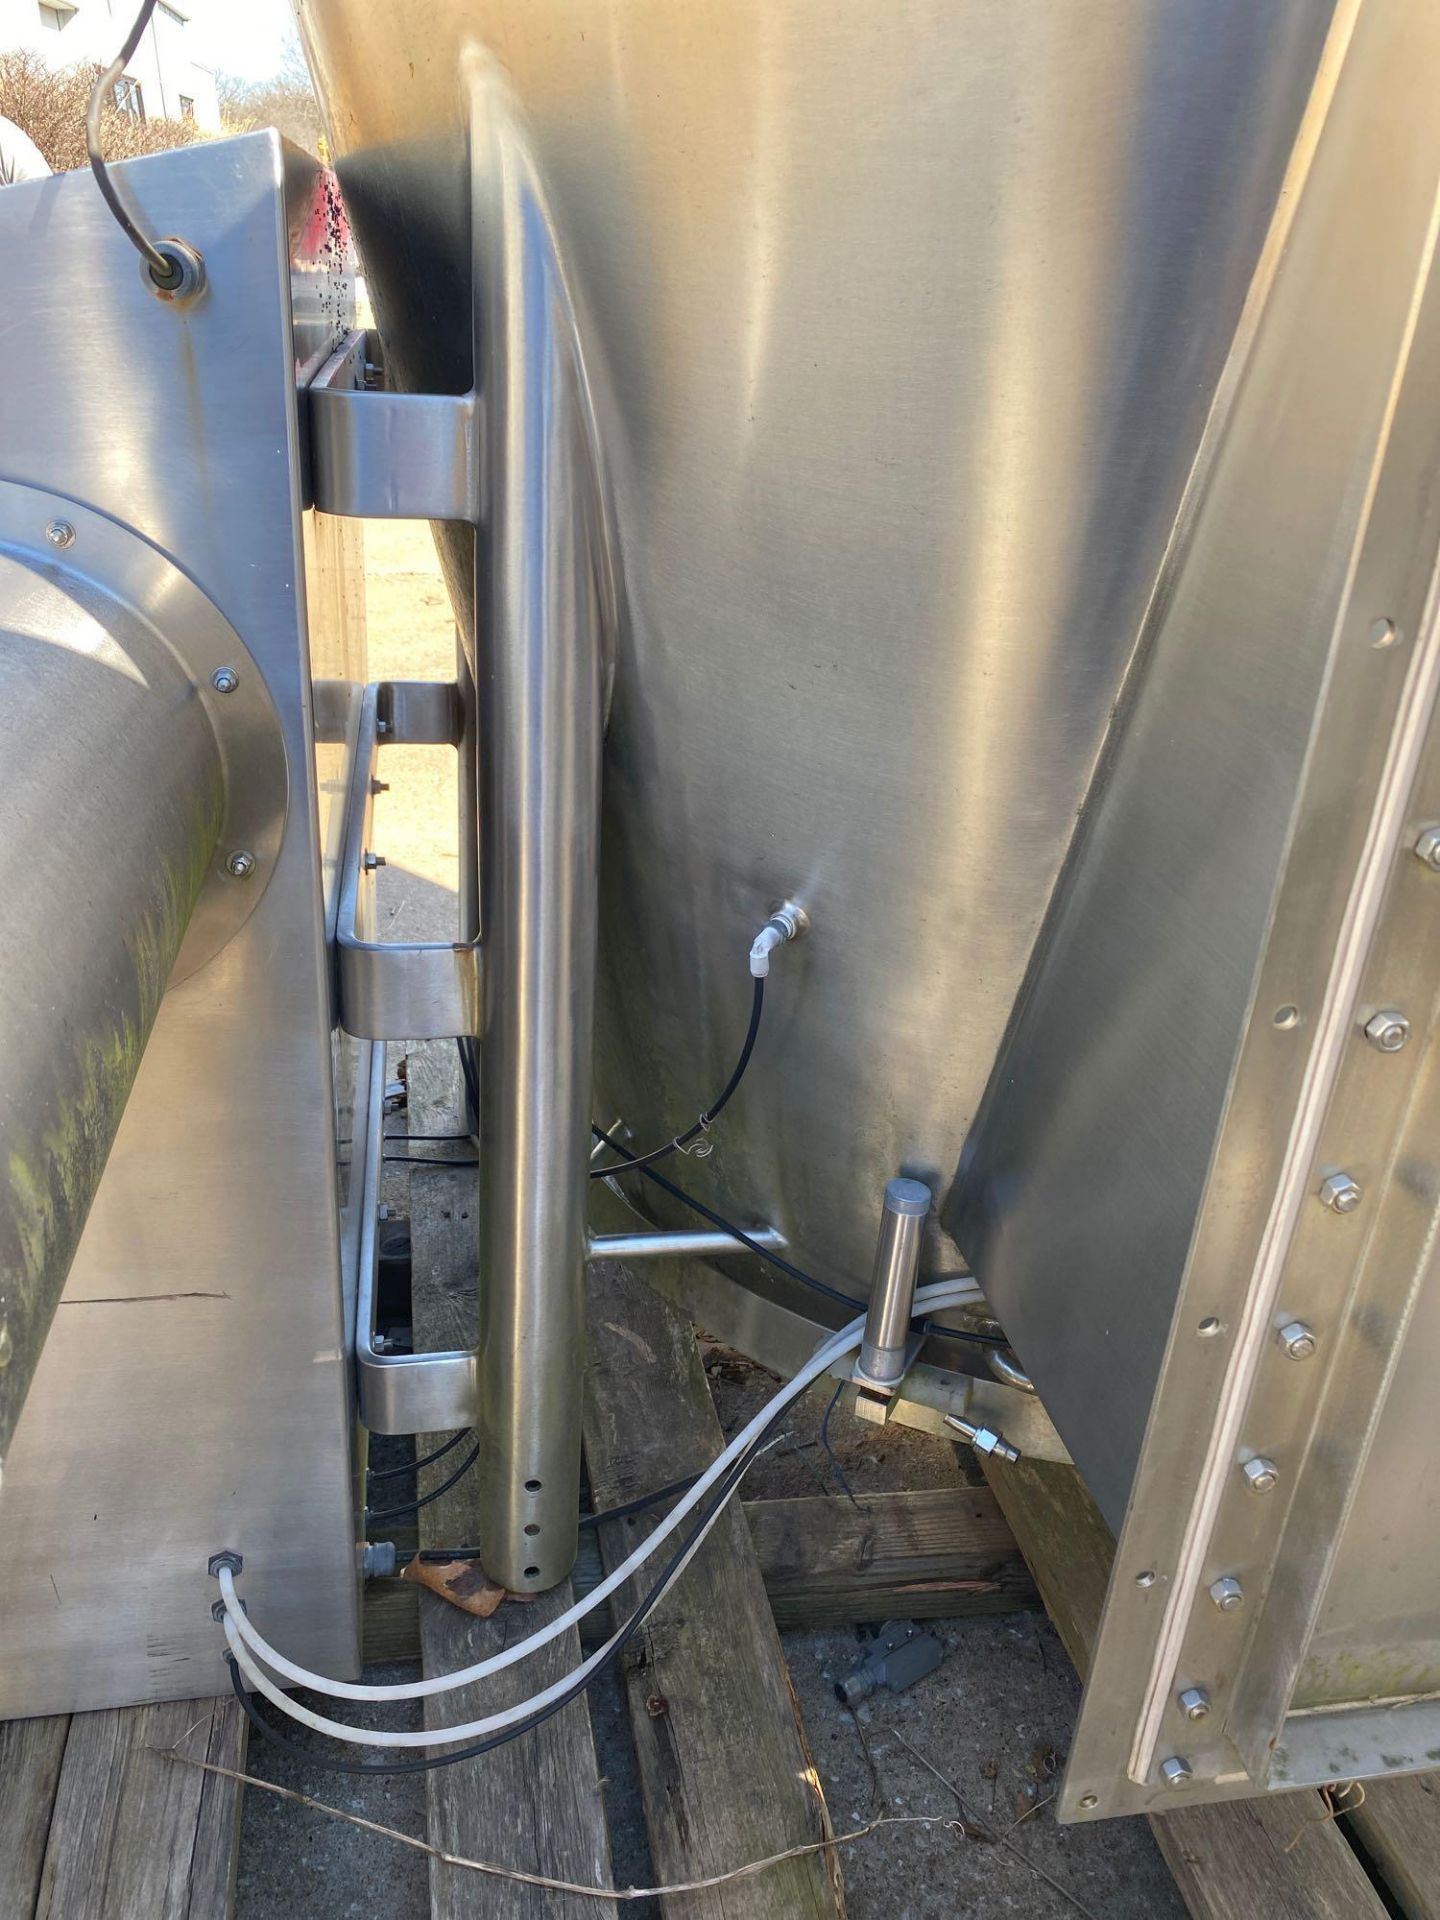 Stainless Steel Industrial Fluid Air Dryer for PARTS - Image 6 of 7